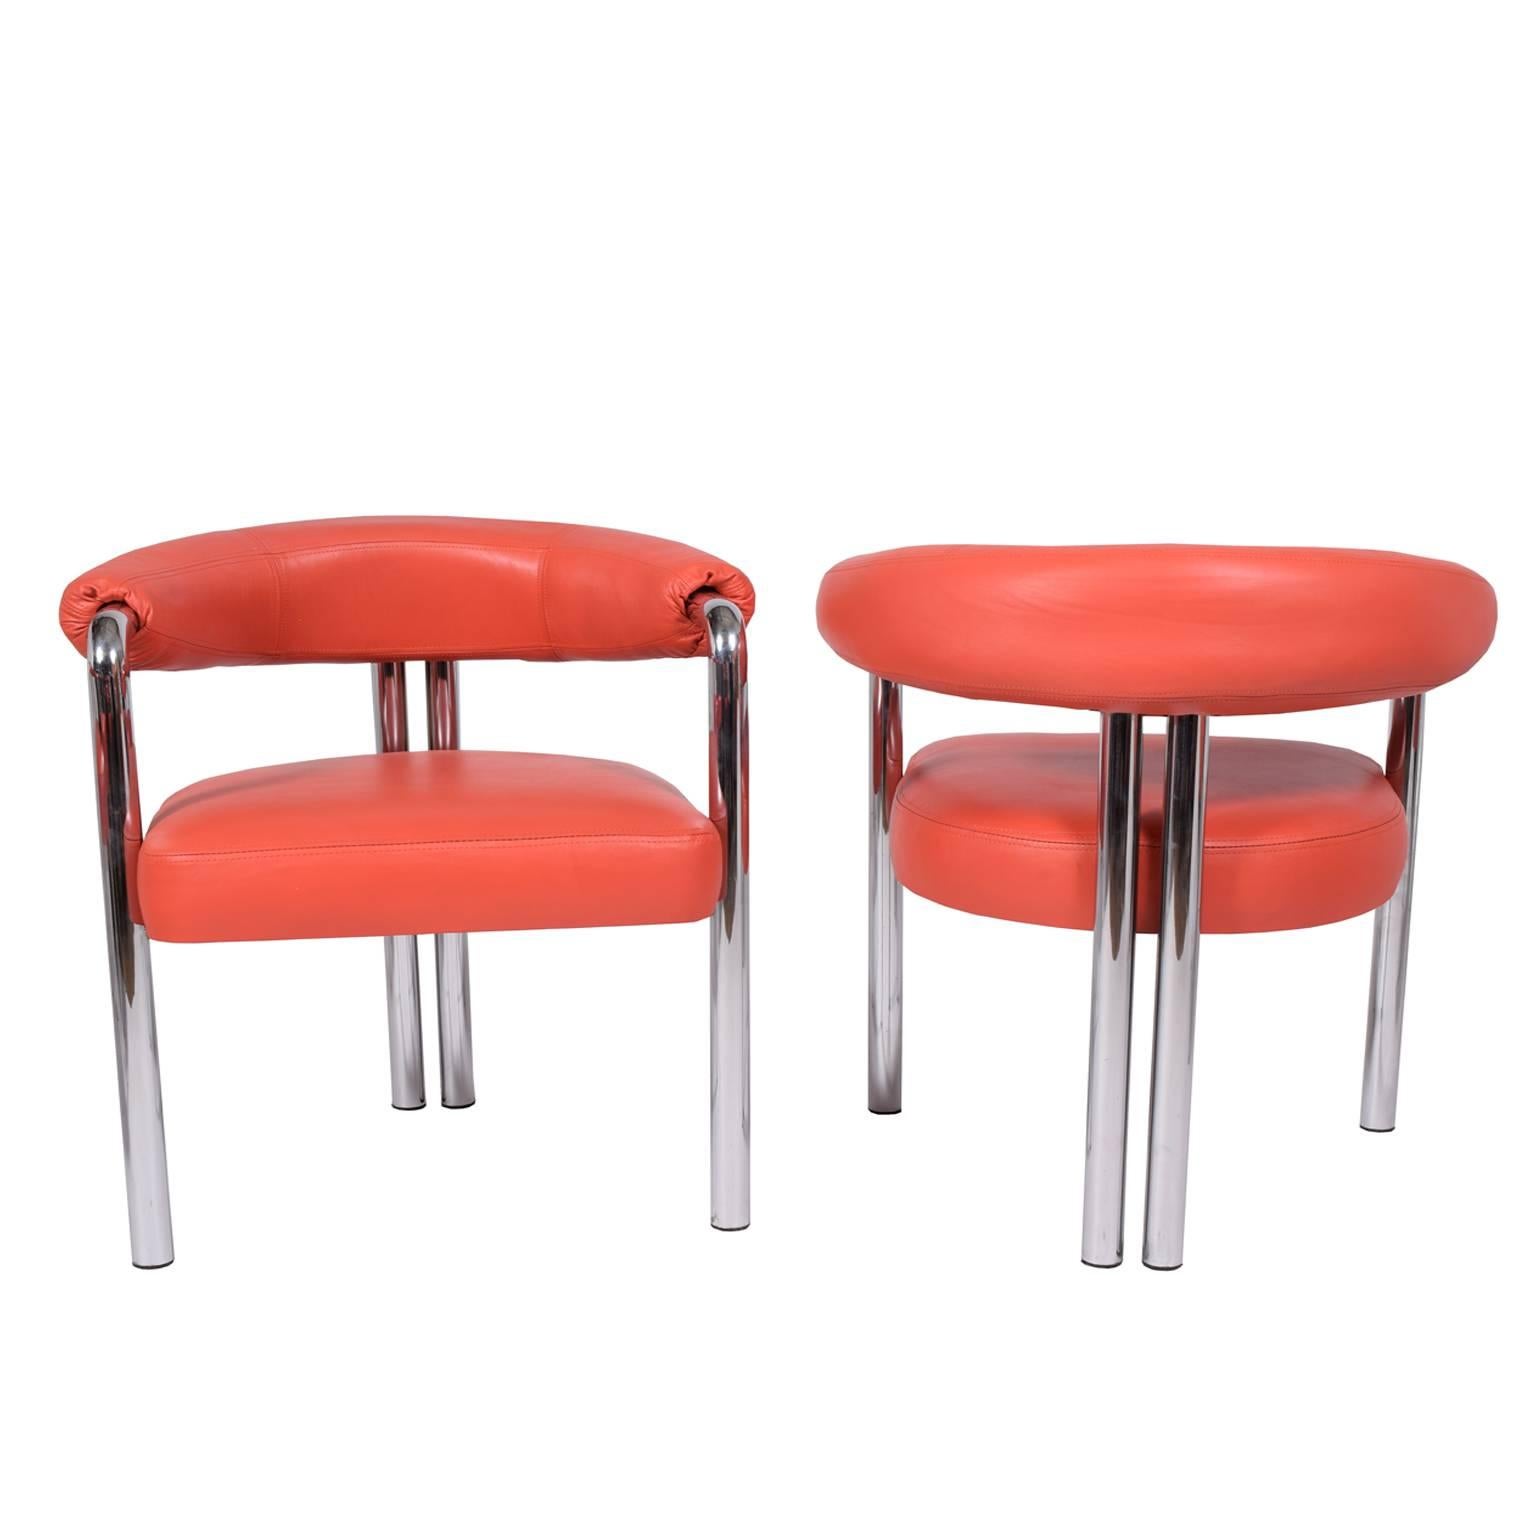 Curved and upholstered back and seat on polished chrome tubular frame. 
New leather upholstery. Retains label.